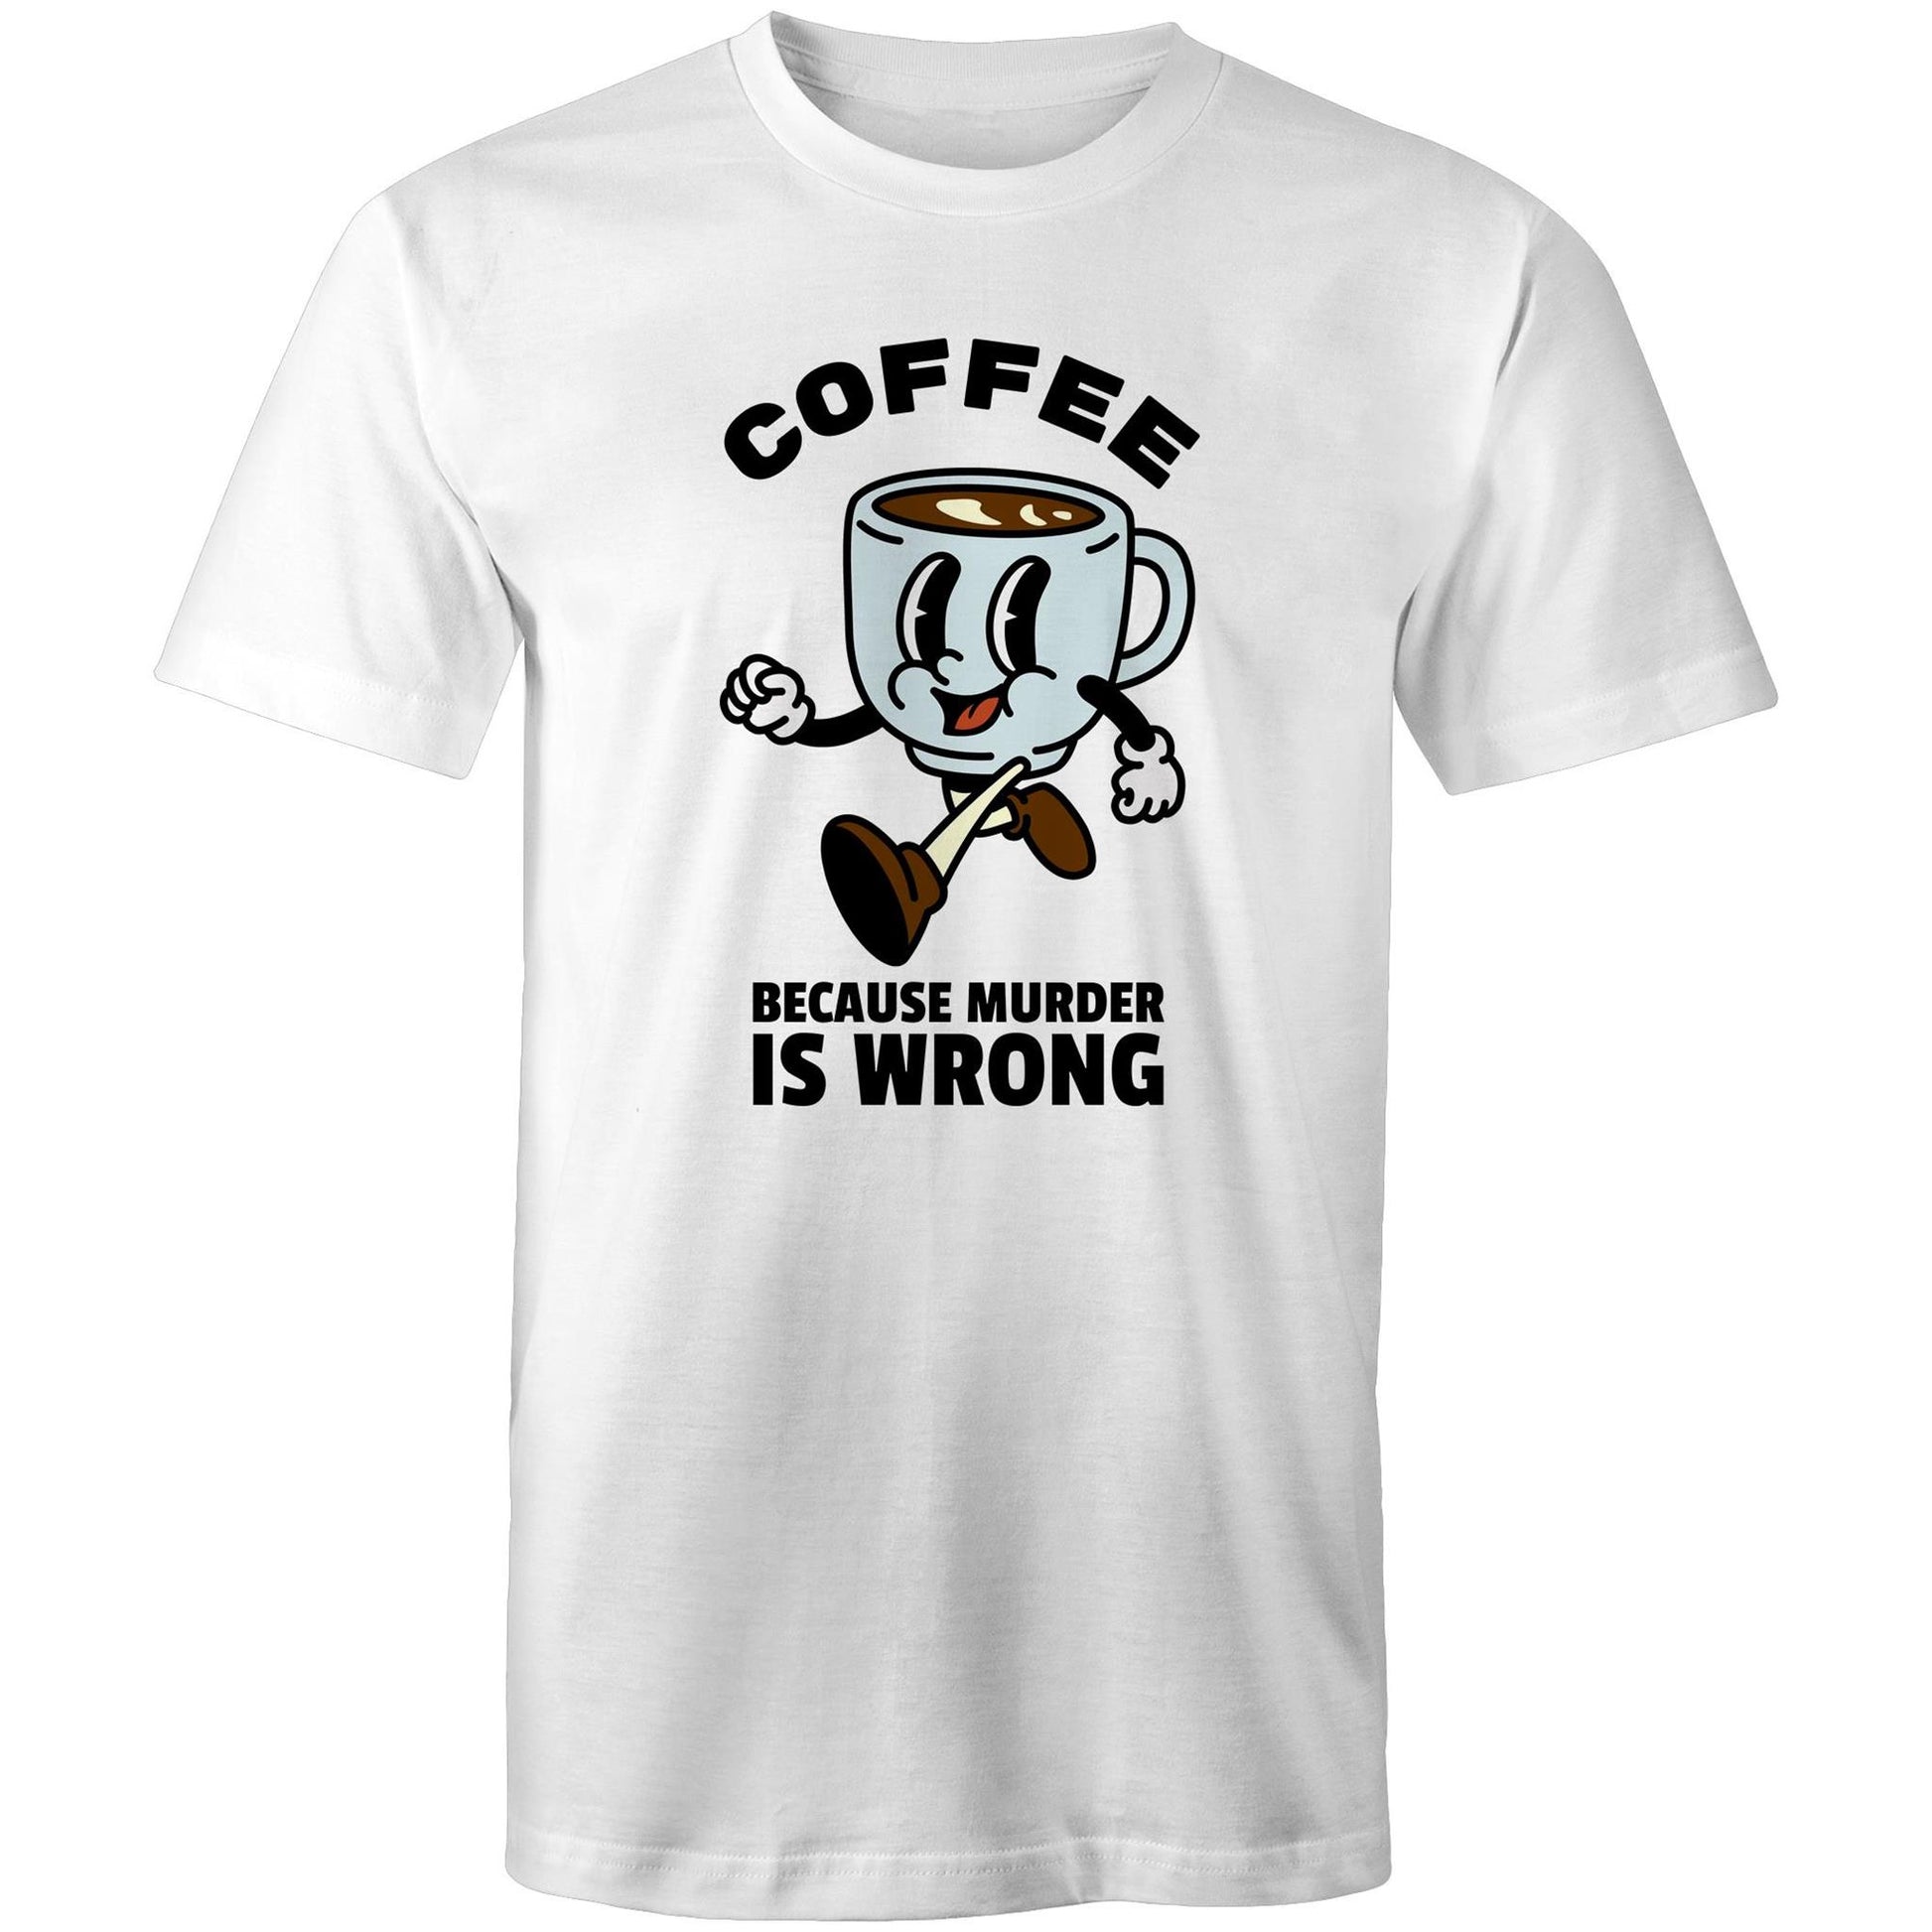 Coffee, Because Murder Is Wrong - Mens T-Shirt White Mens T-shirt Coffee